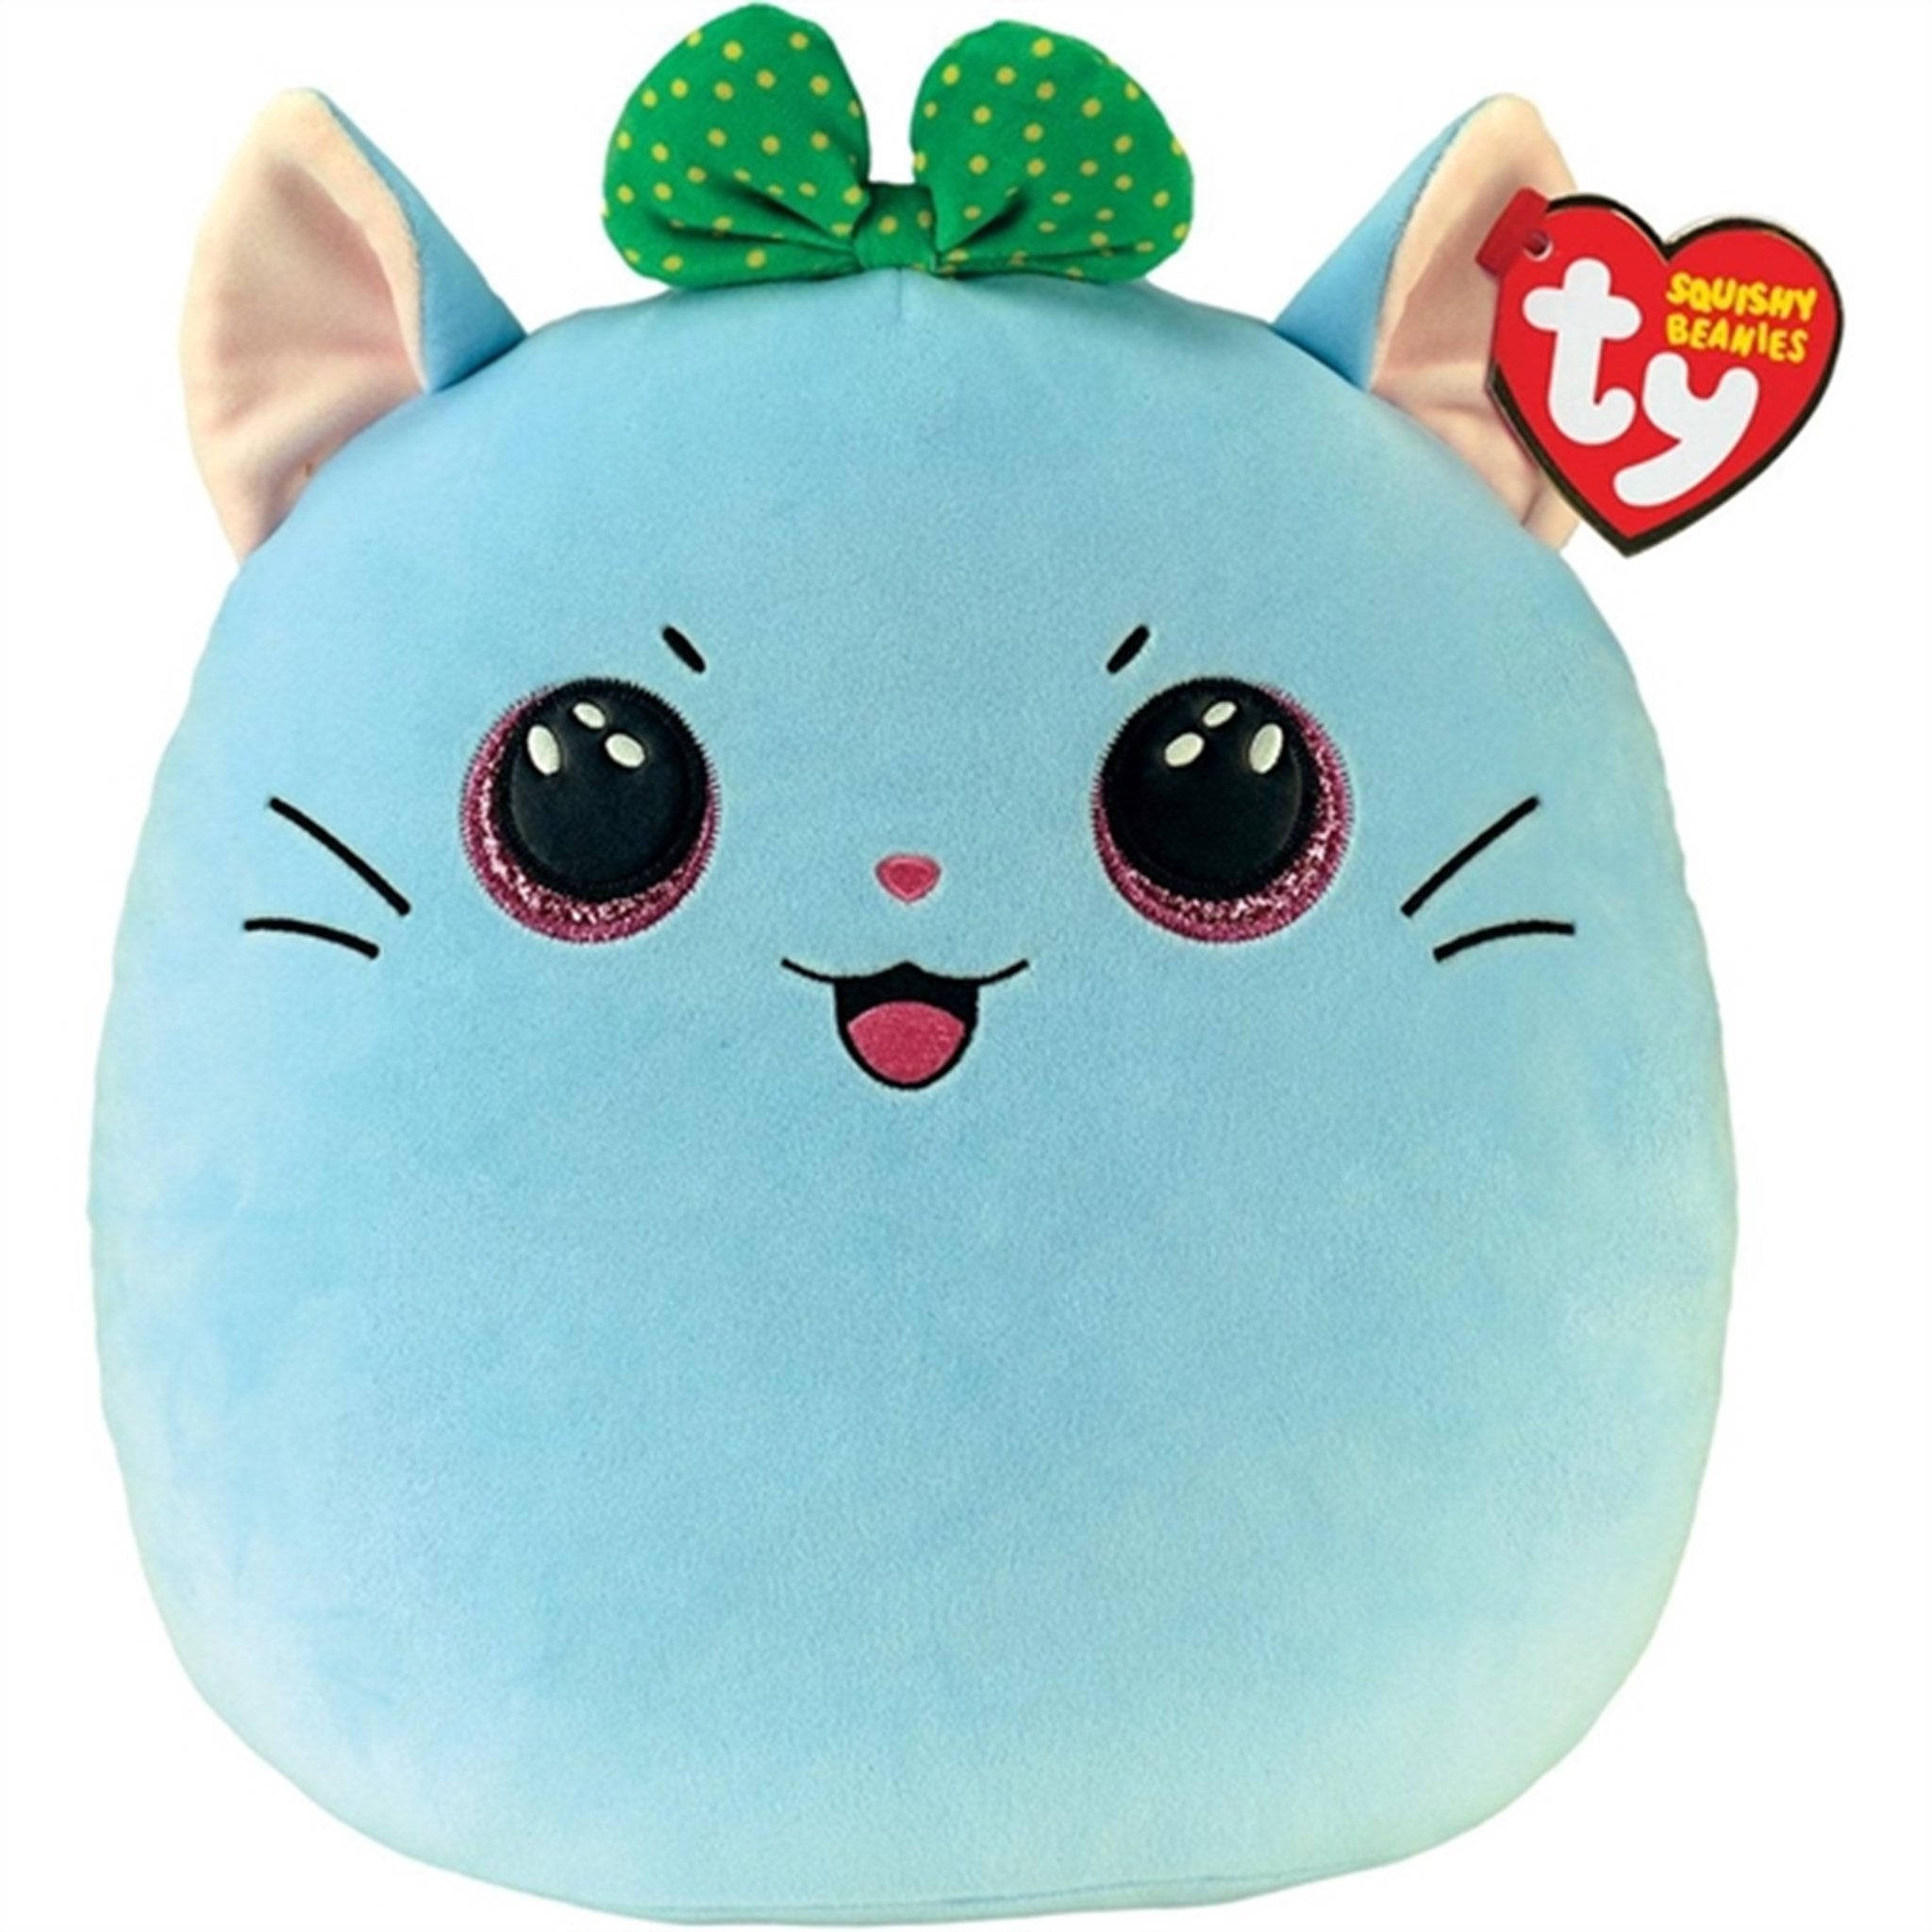 TY Squishy Beanies Kirra - Kat With Bow Squish 35cm